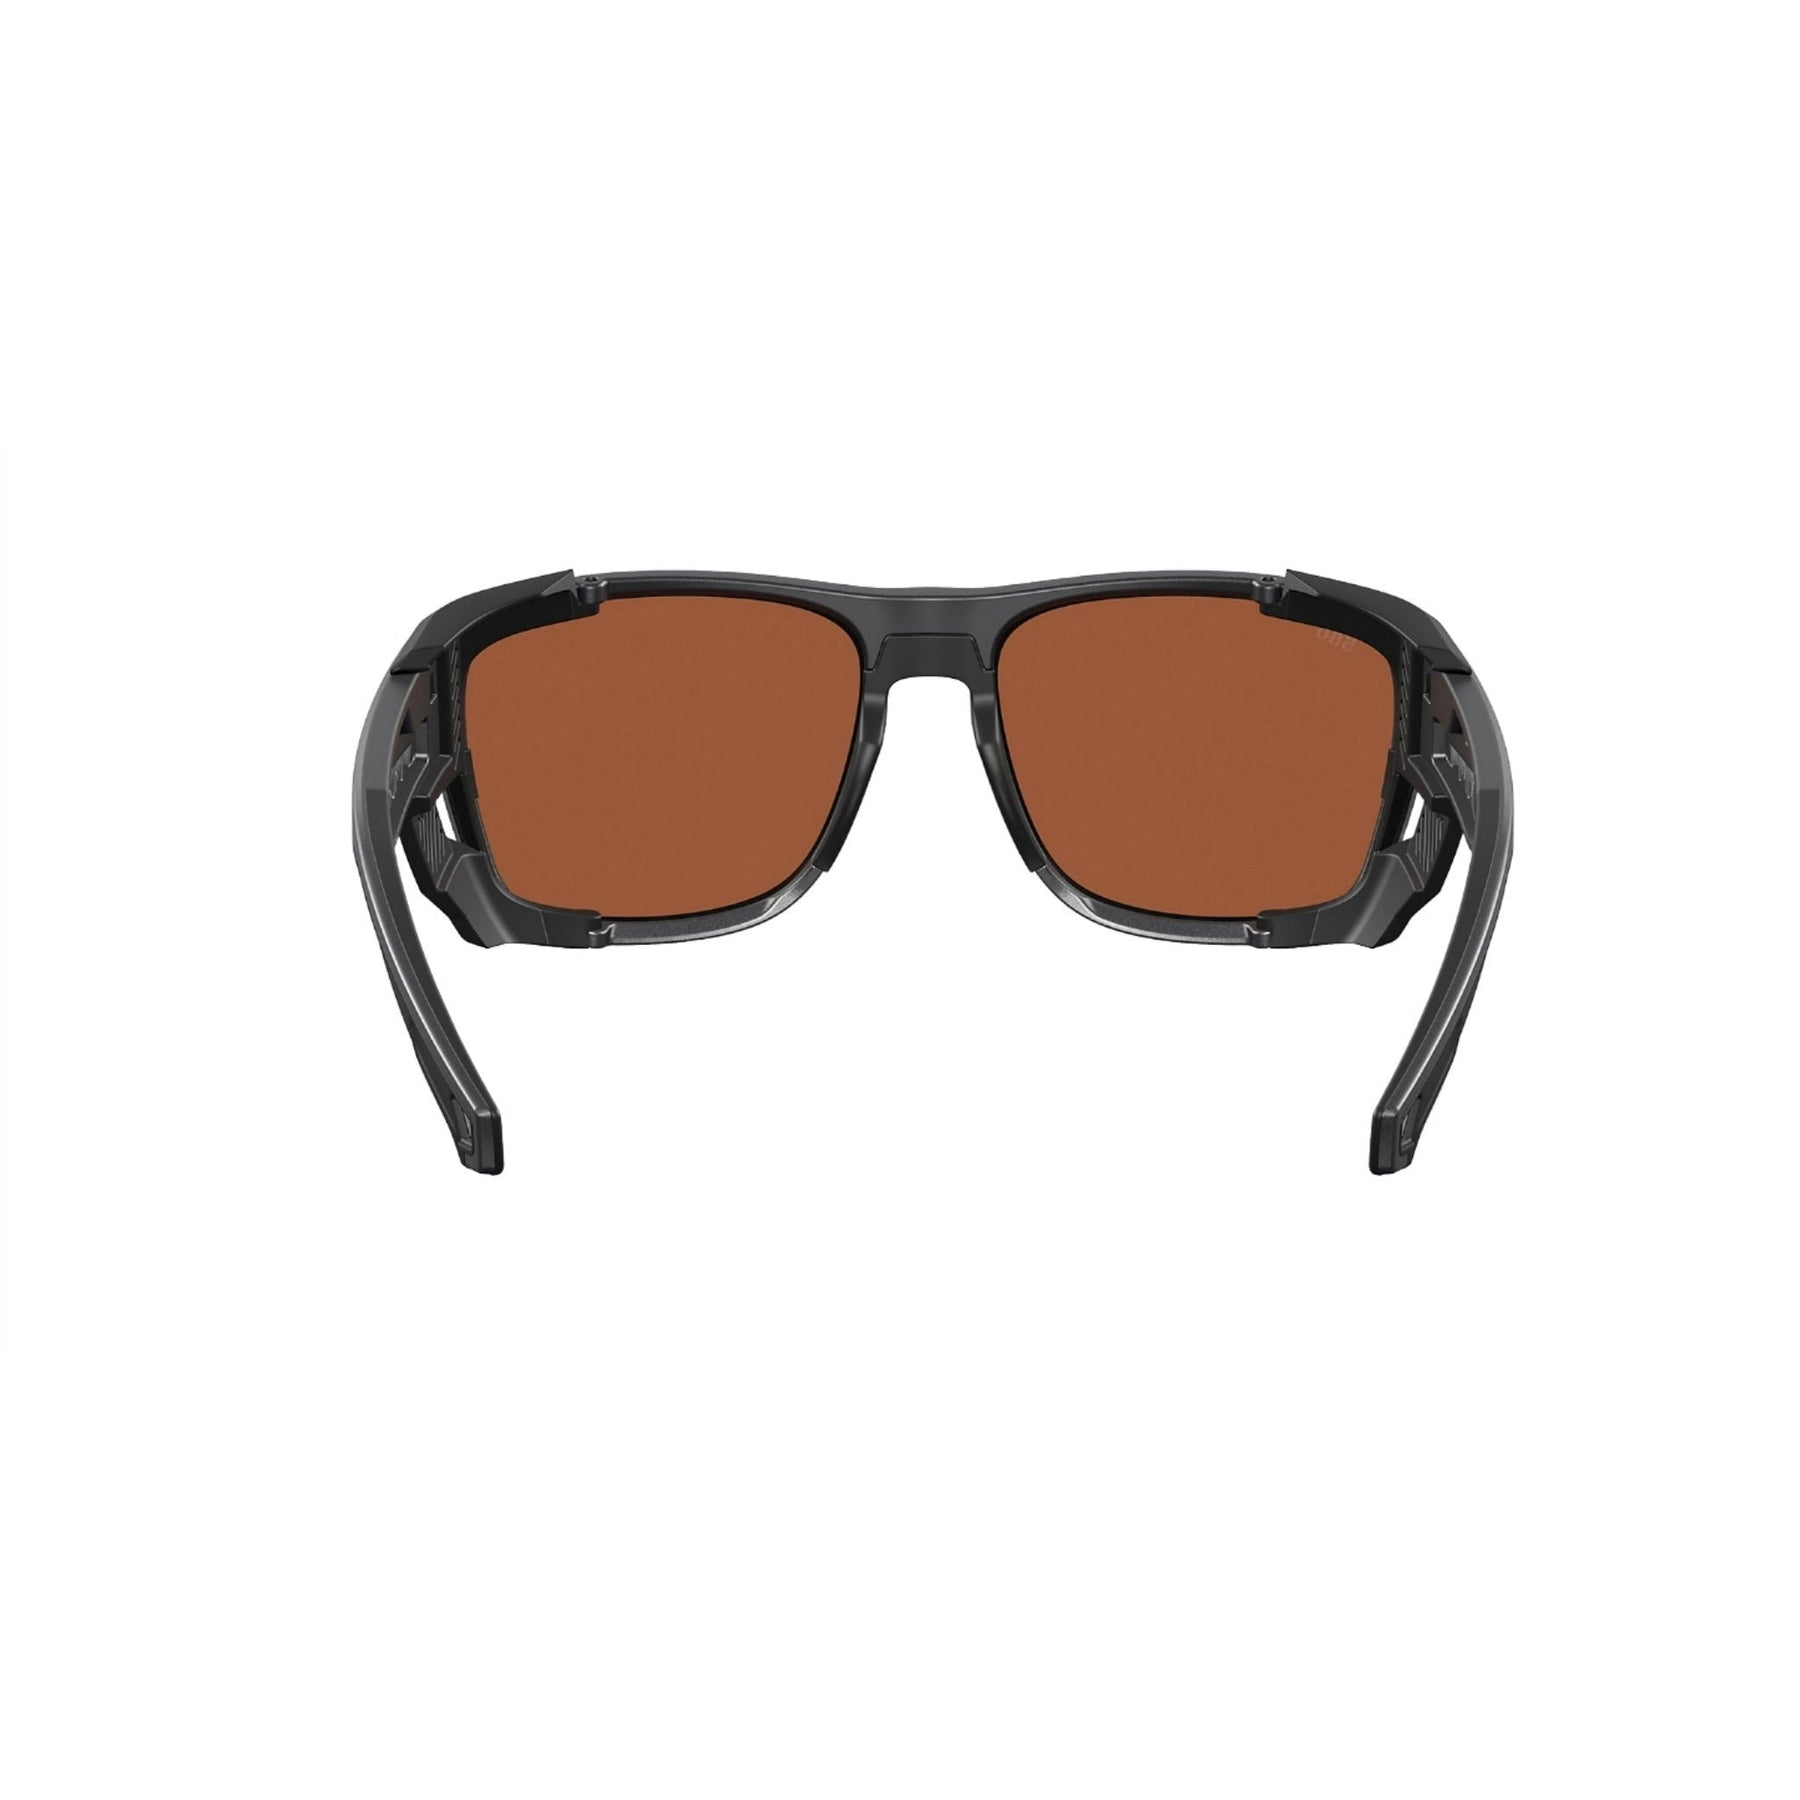 View of Sunglasses Costa King Tide 6 Black Green Mirror available at EZOKO Pike and Musky Shop